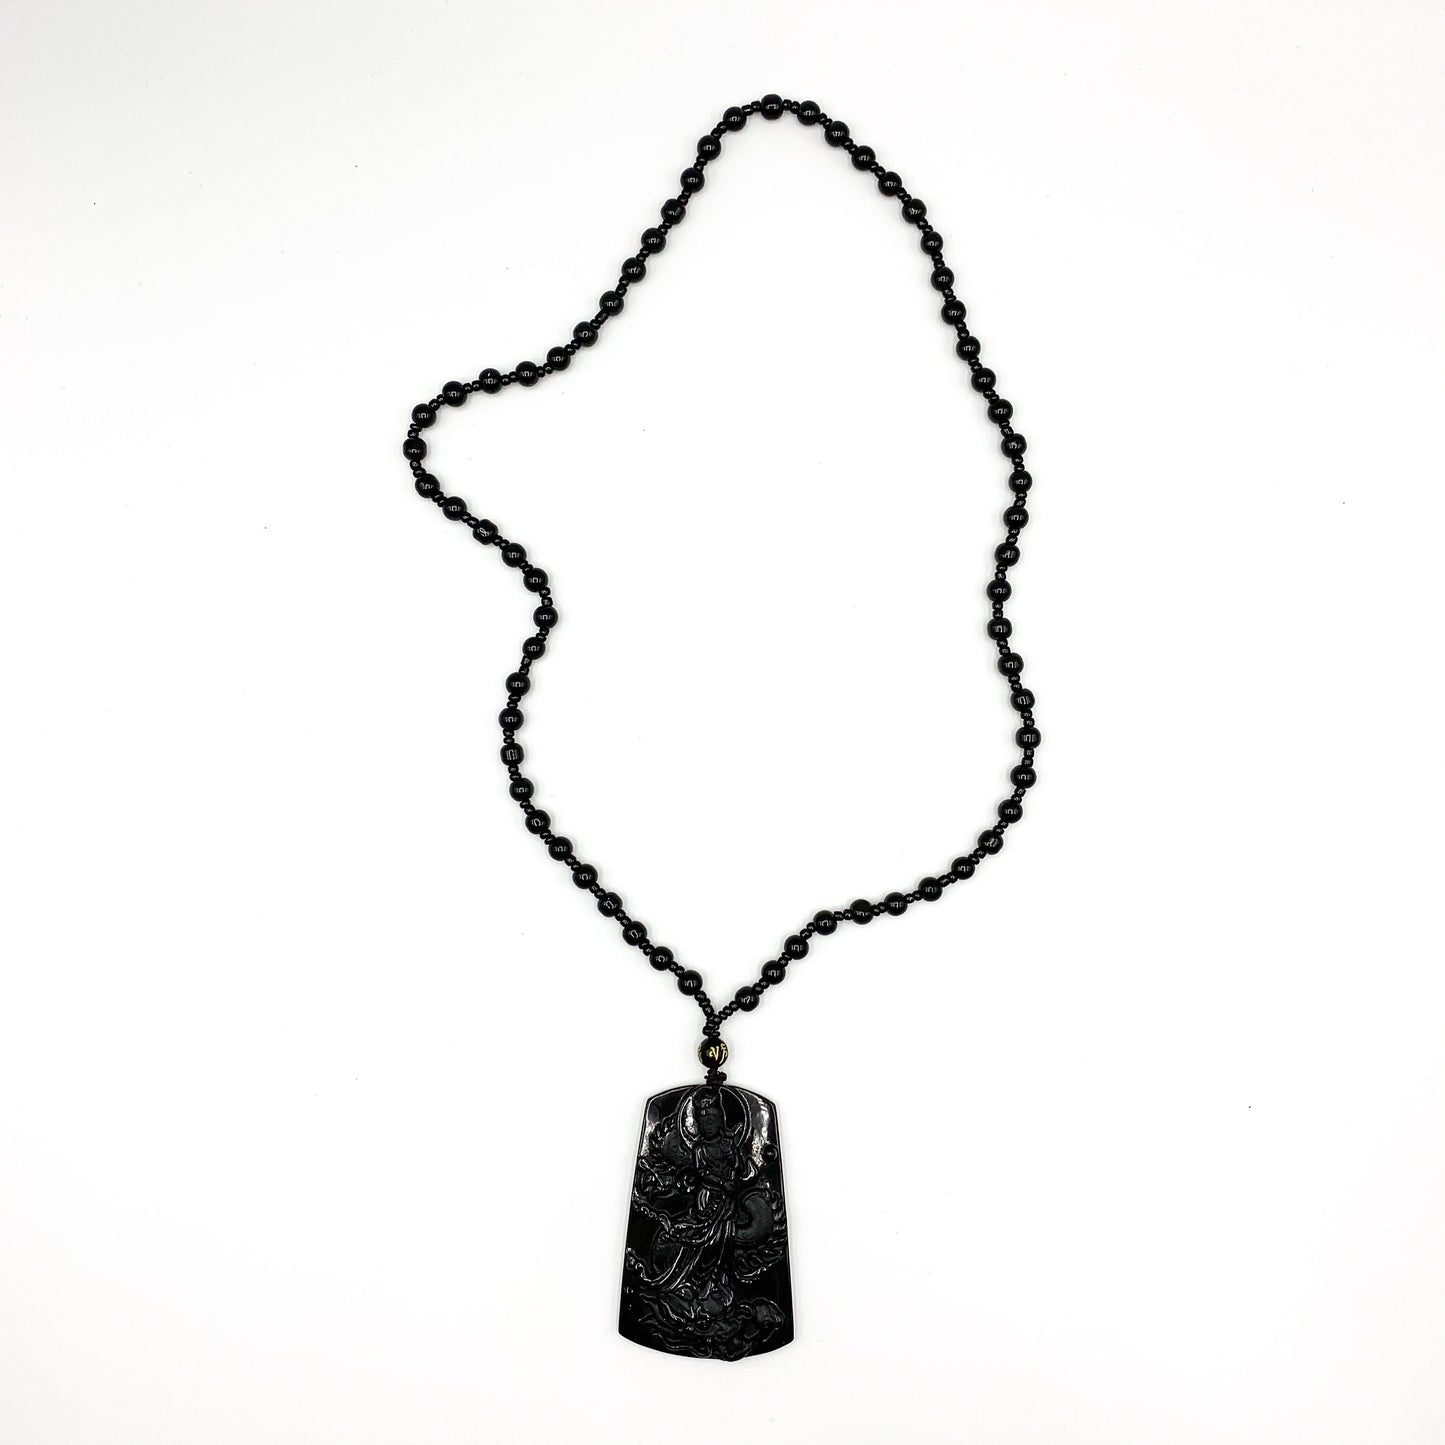 Black Jadeite Jade Omphacite Guan Yin Protected by Dragon Necklace, YJ-0321-0353949 - AriaDesignCollection